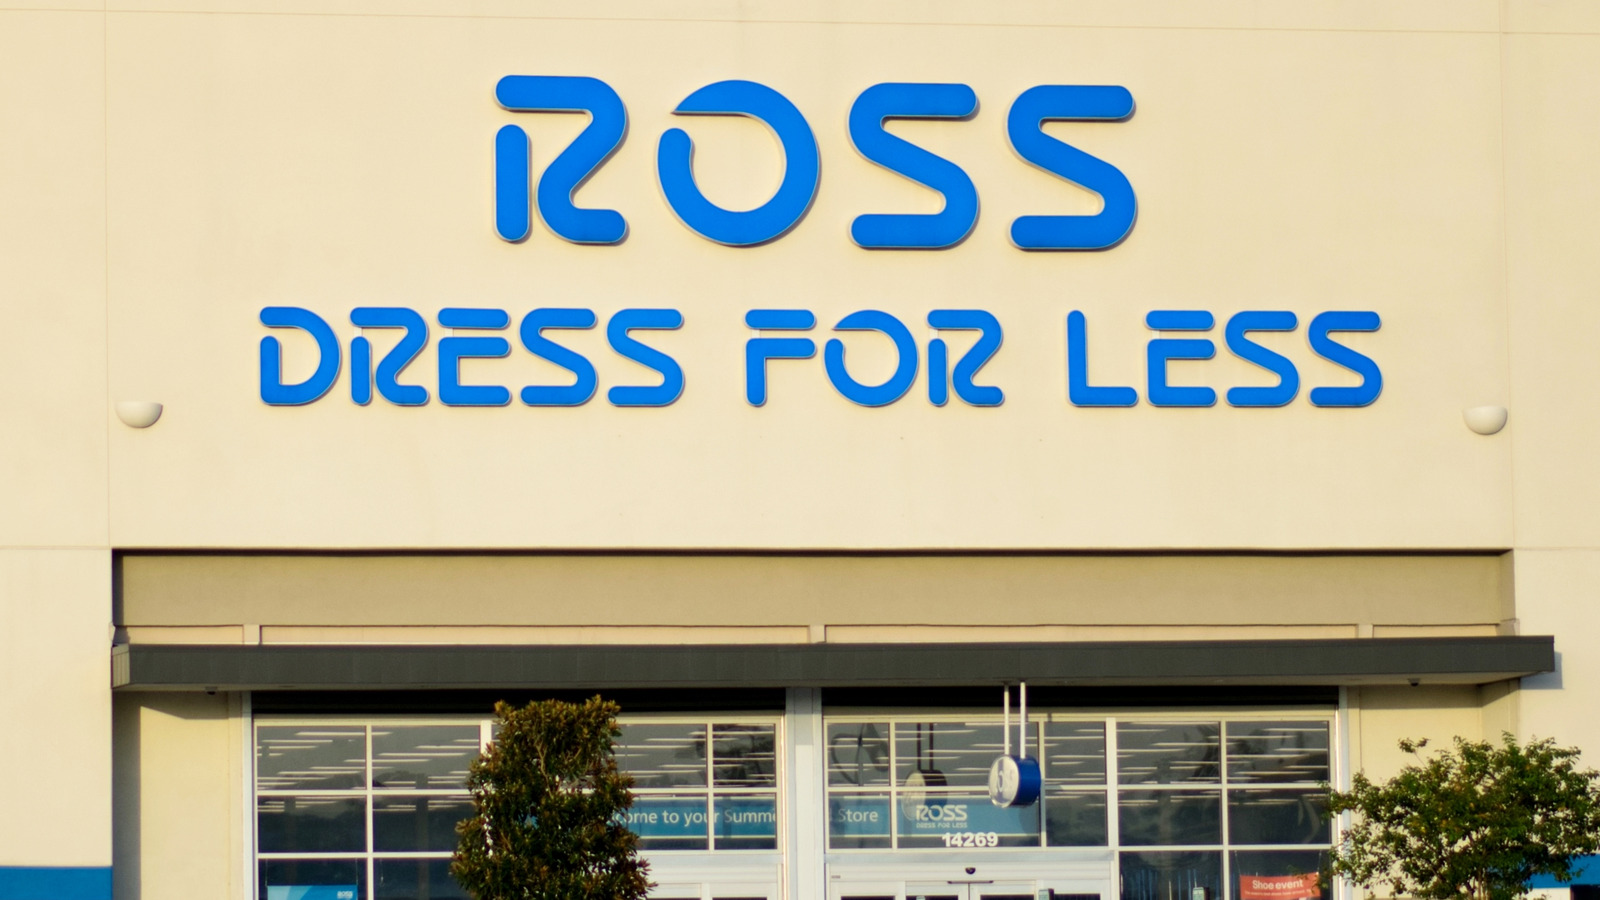 Ross Dress for Less - Pick up our wildly affordable cheetah-chic purses. |  Facebook